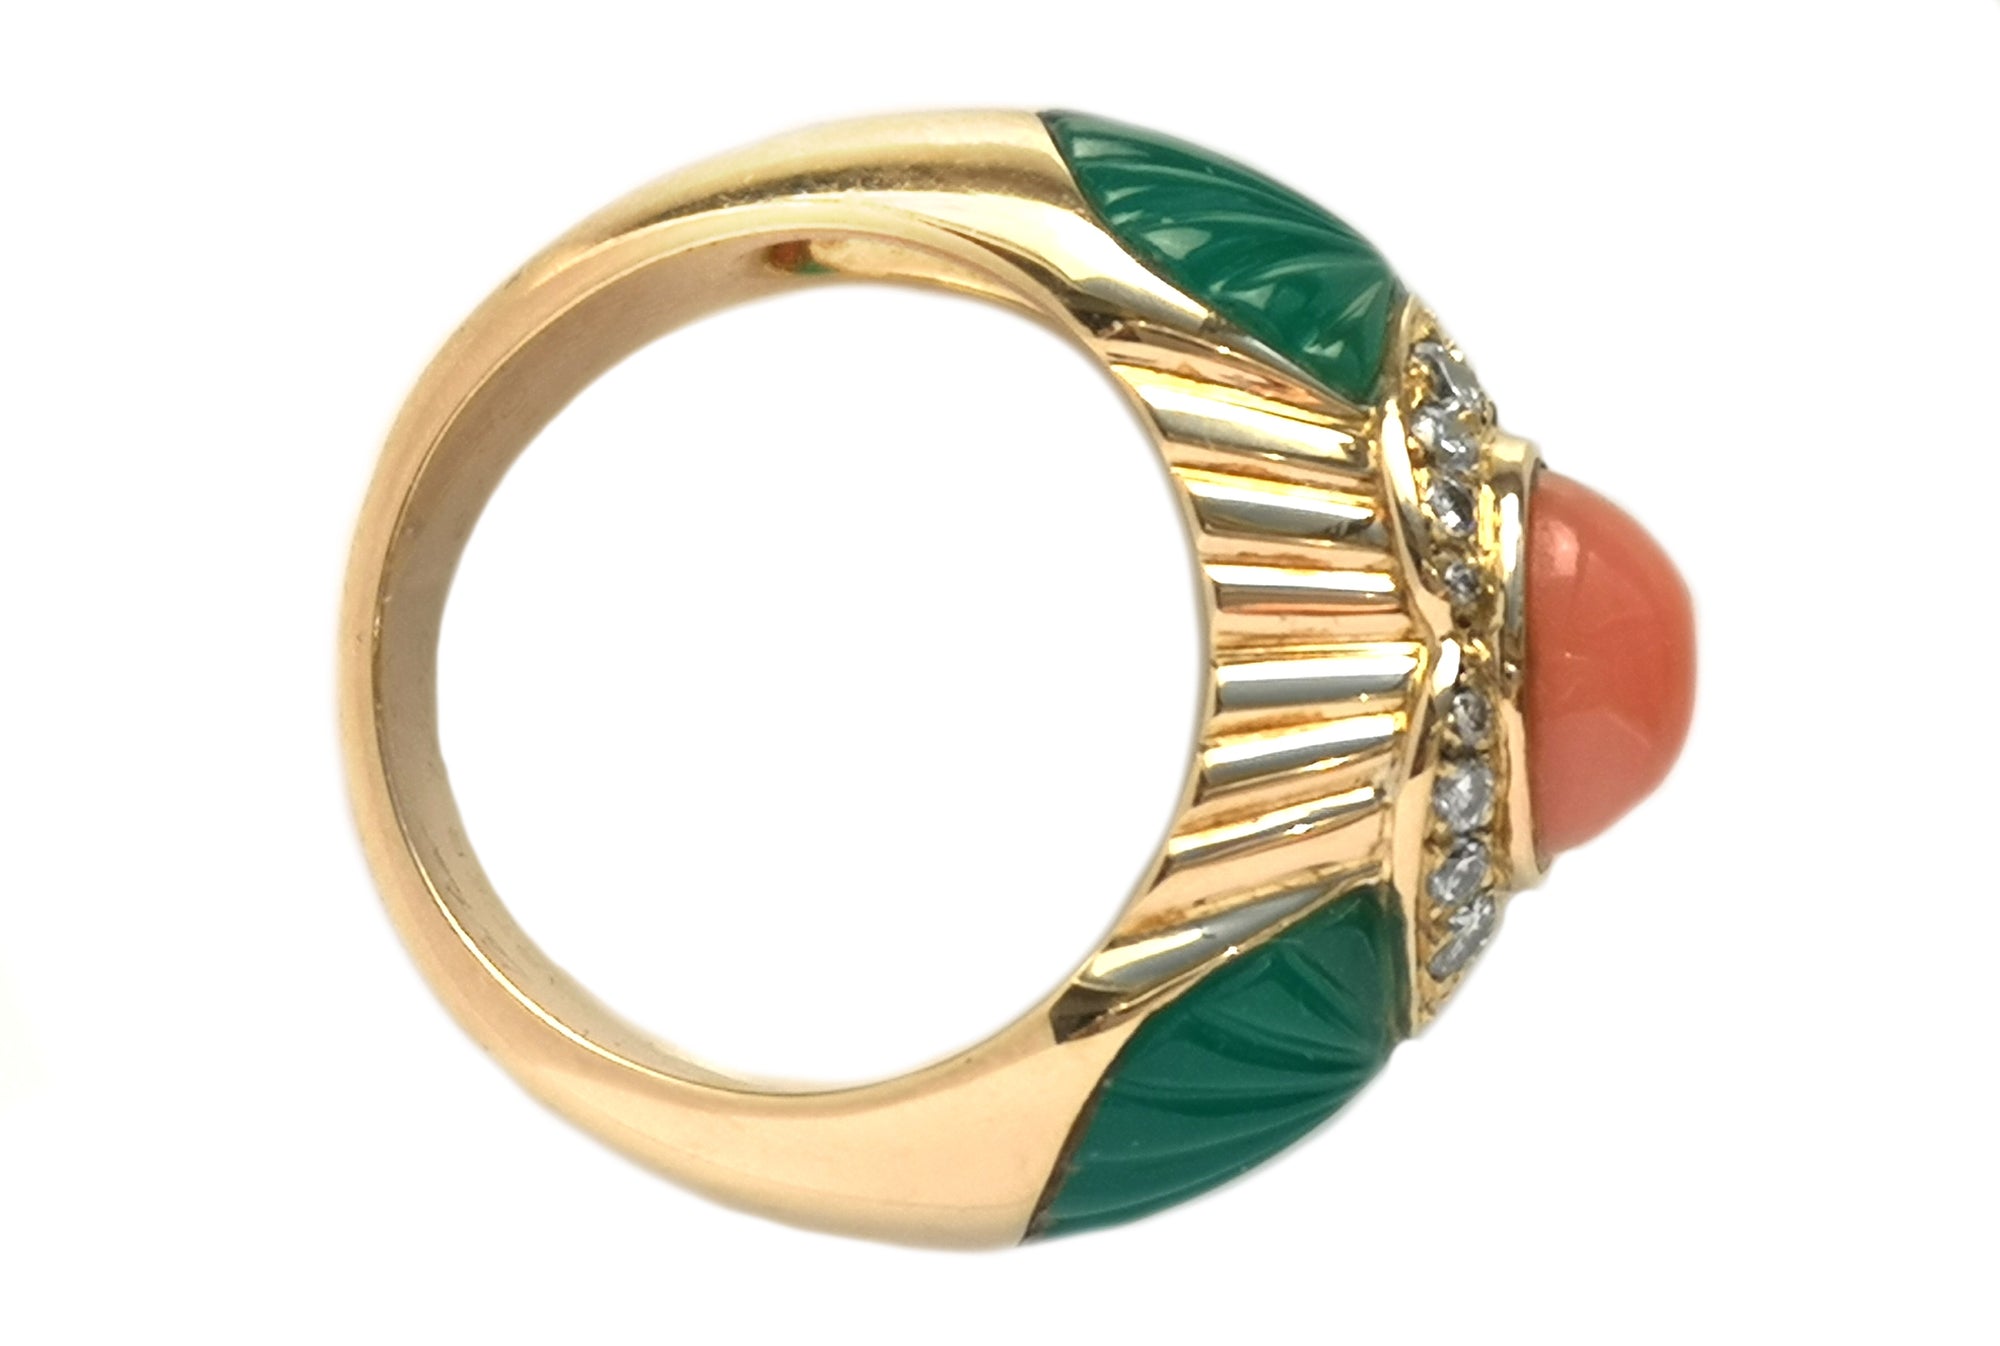 Vintage Cartier Cabochon Coral Carved Chalcedony Diamond Ring